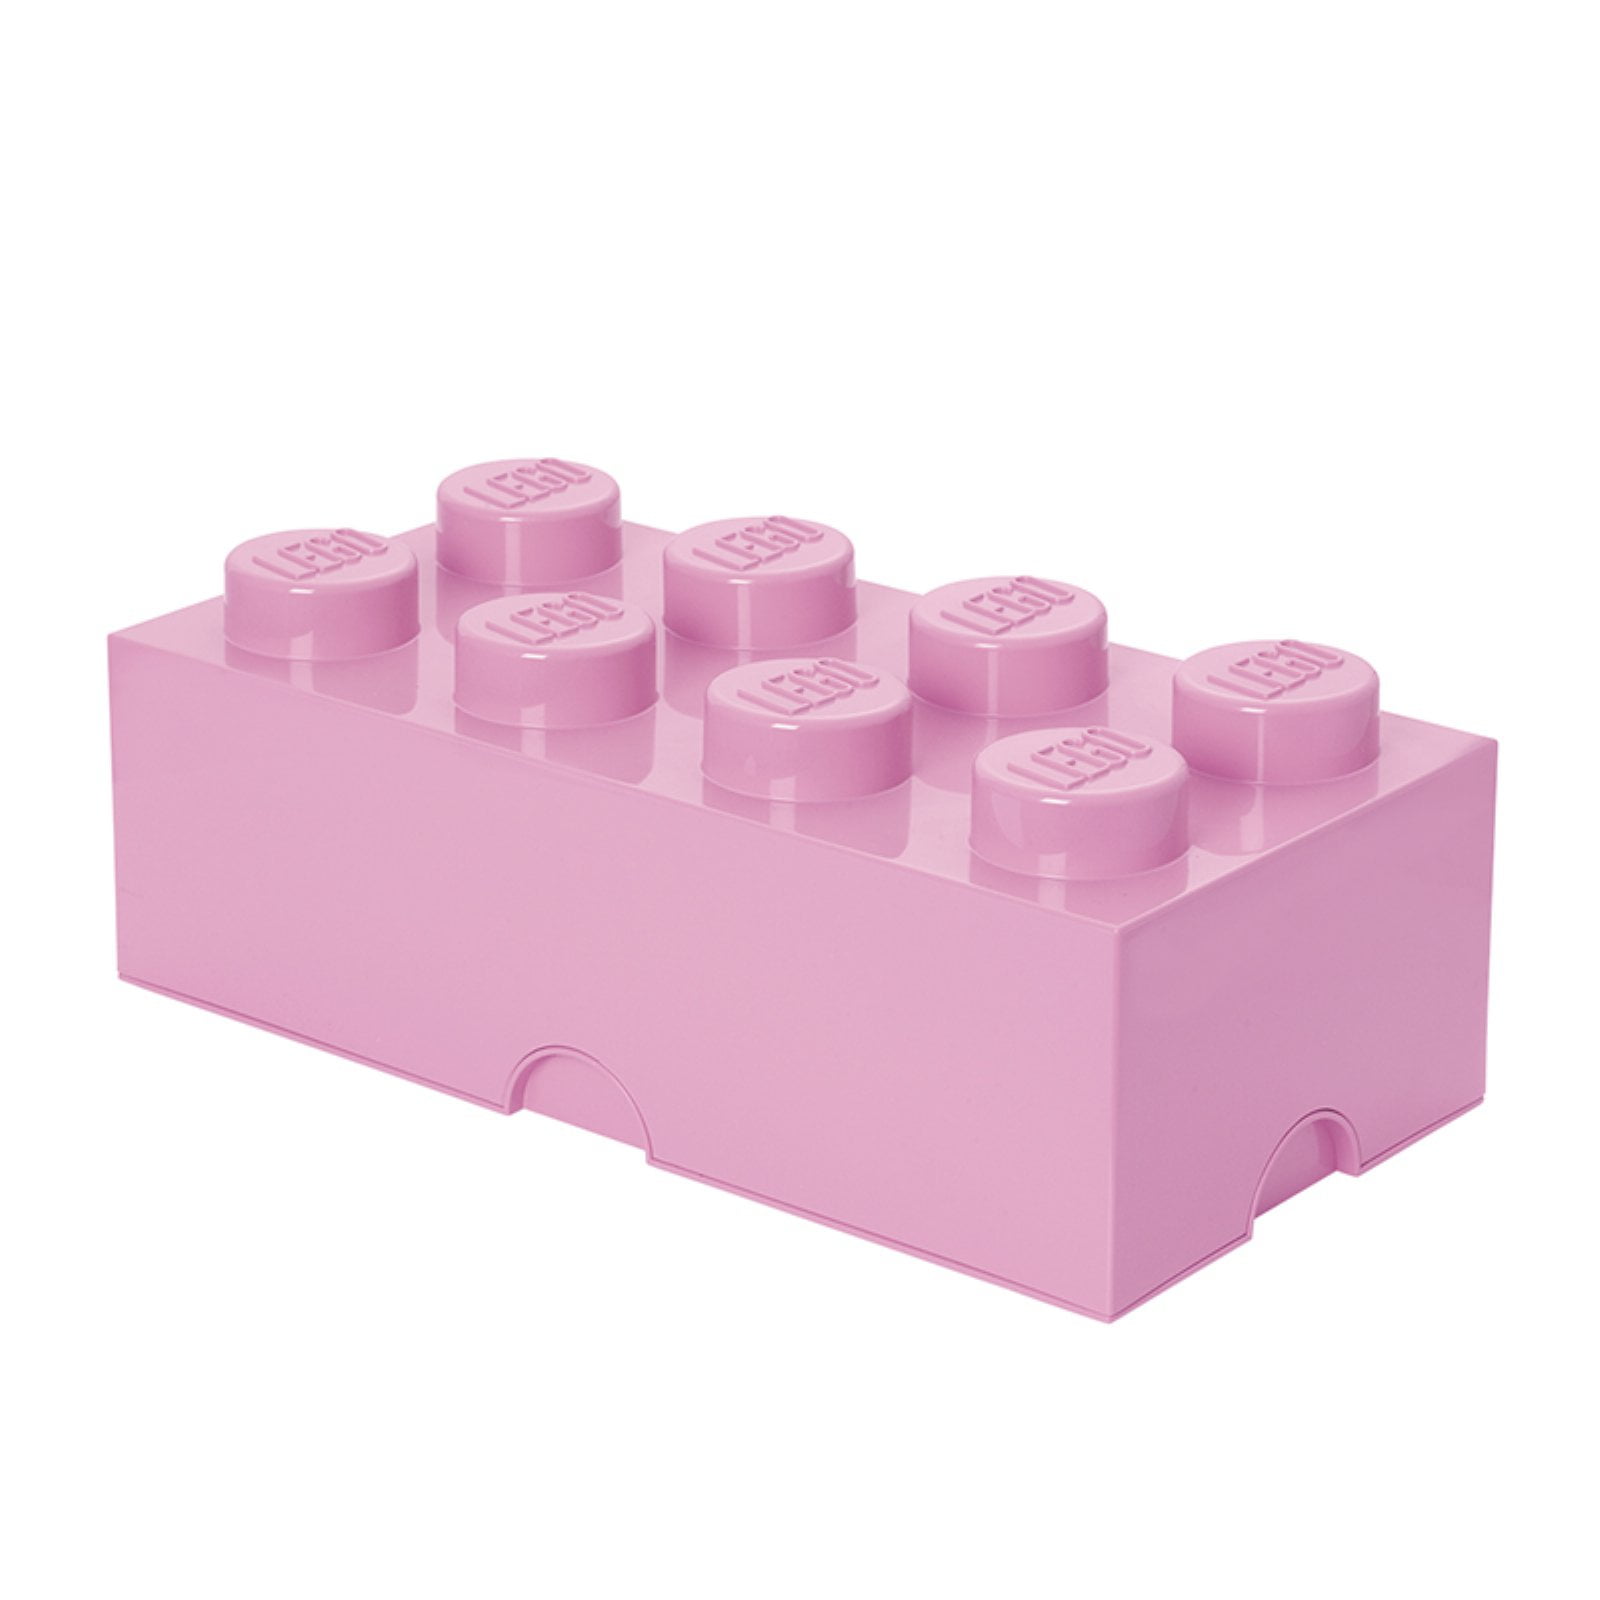 LEGO Target Brick RED Storage Box with PINK Handle